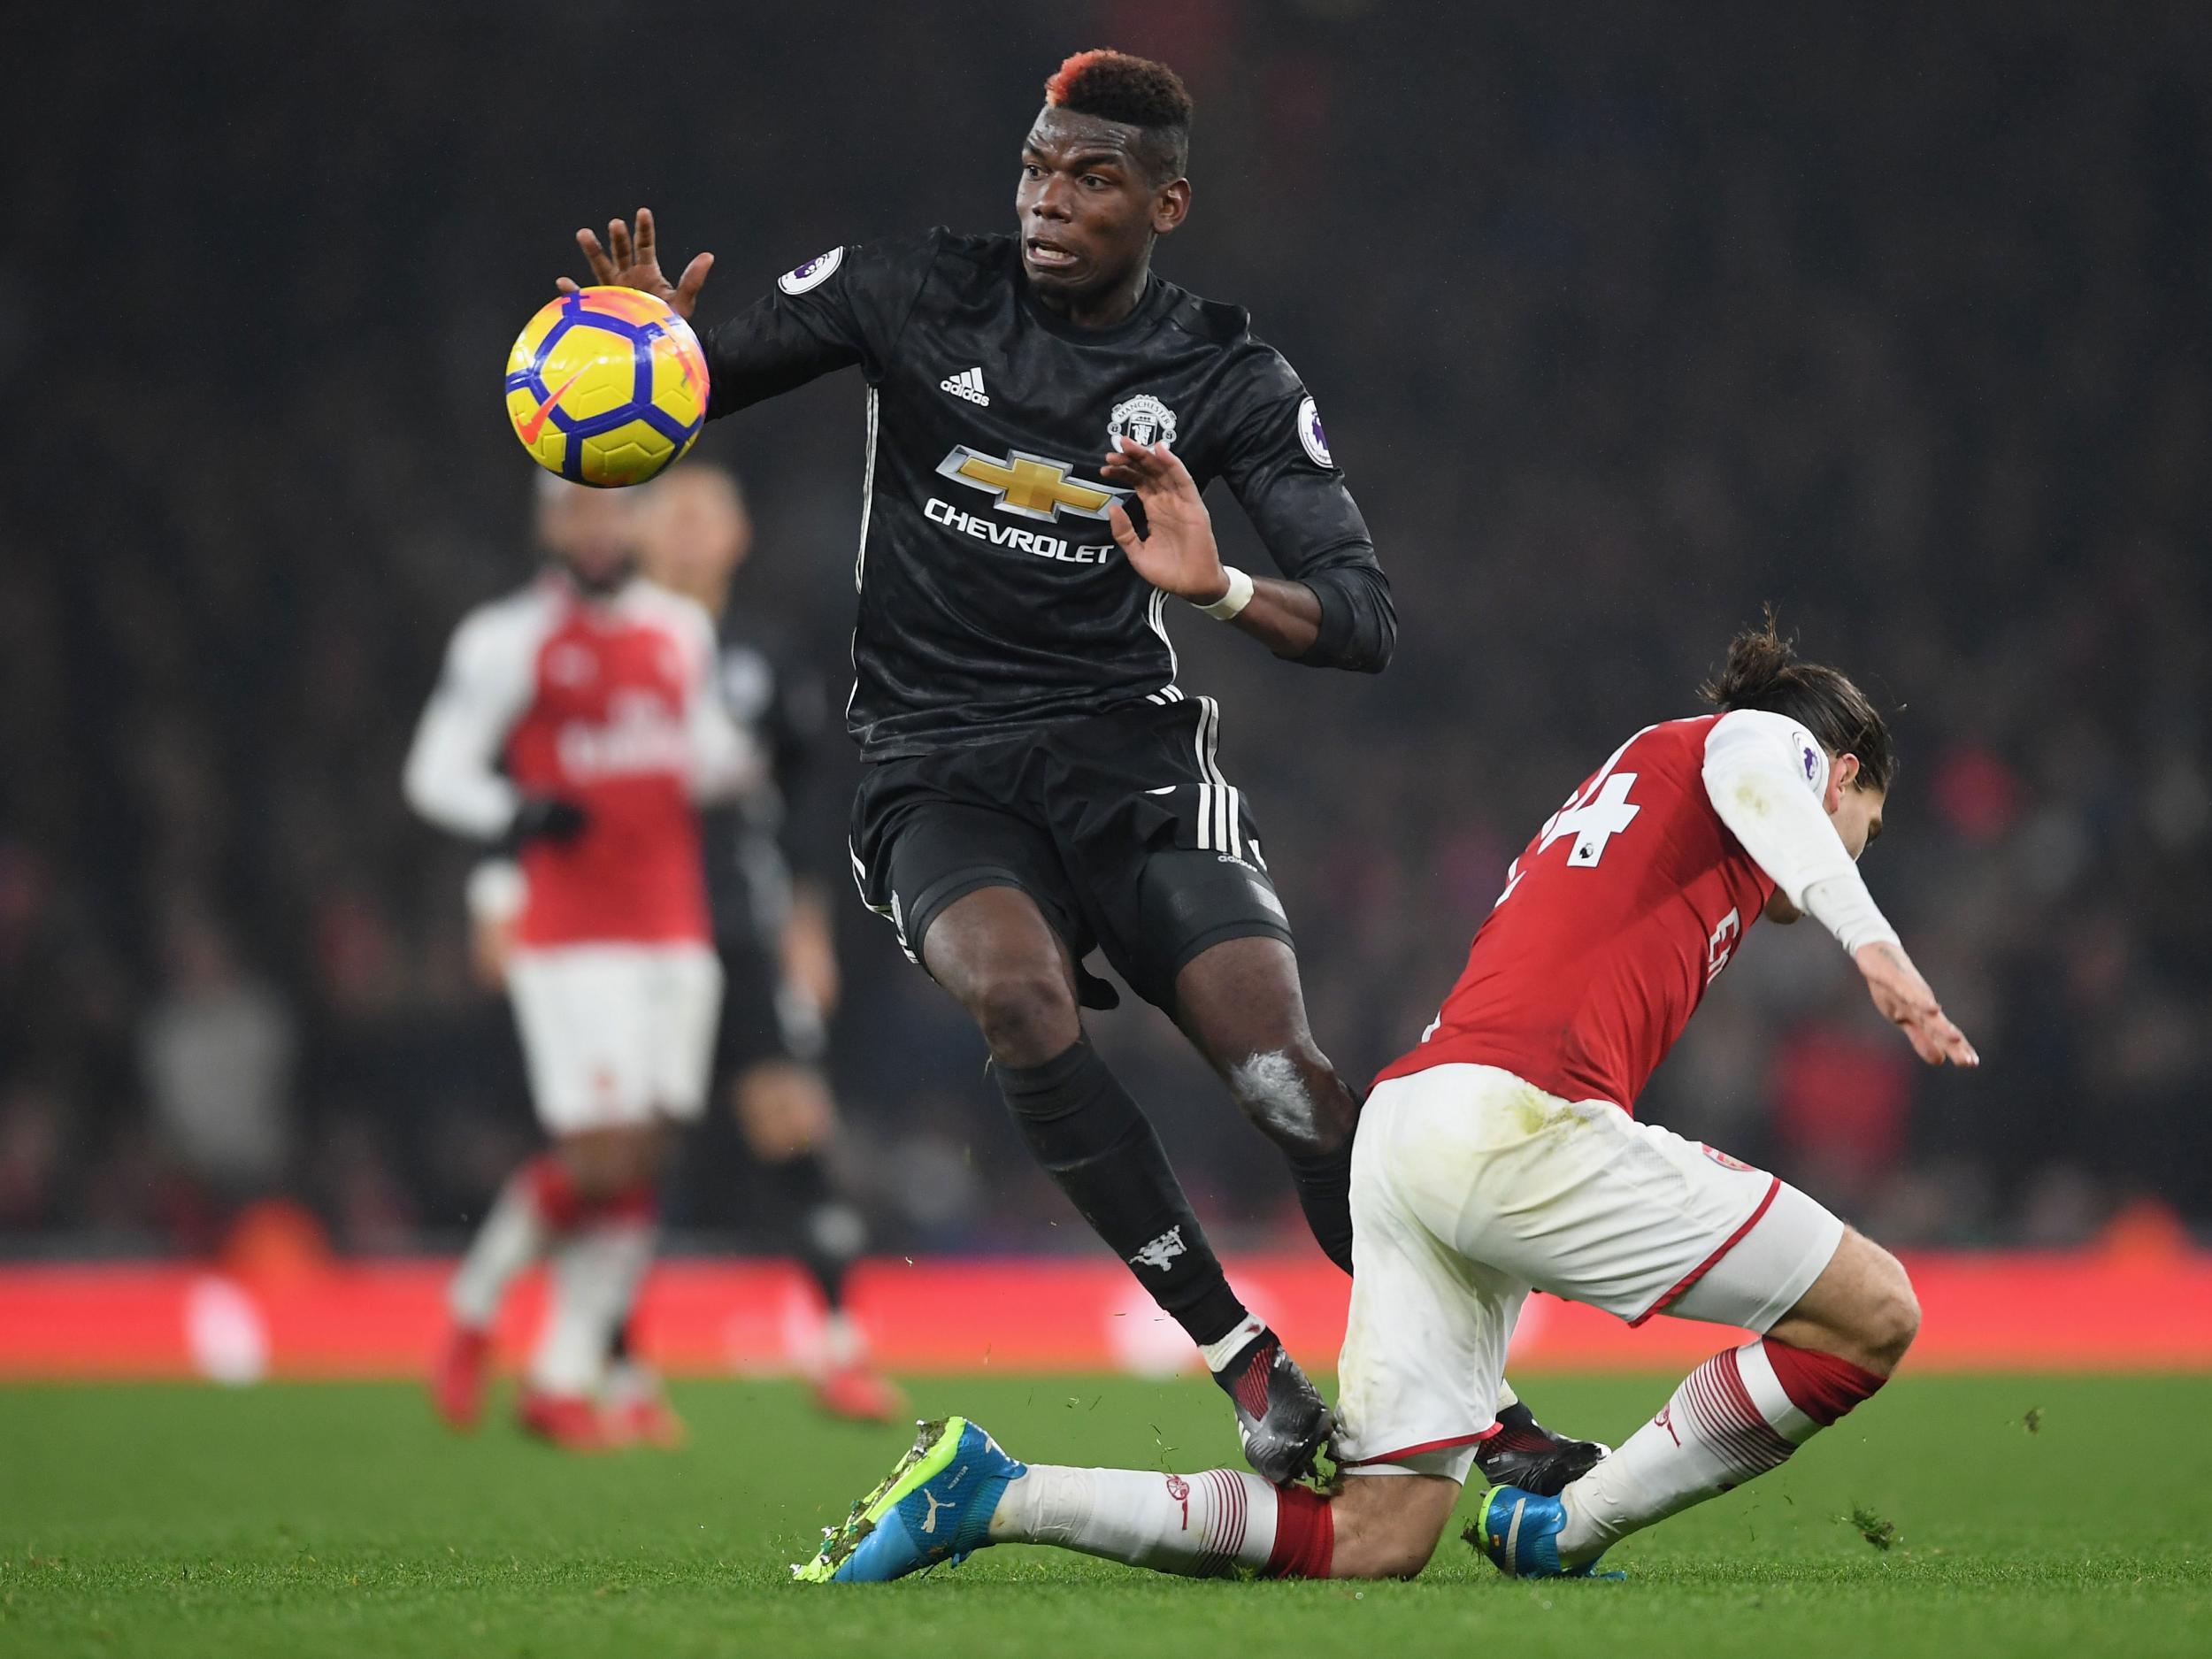 Paul Pogba says his tackle on Hector Bellerin was purely accidental